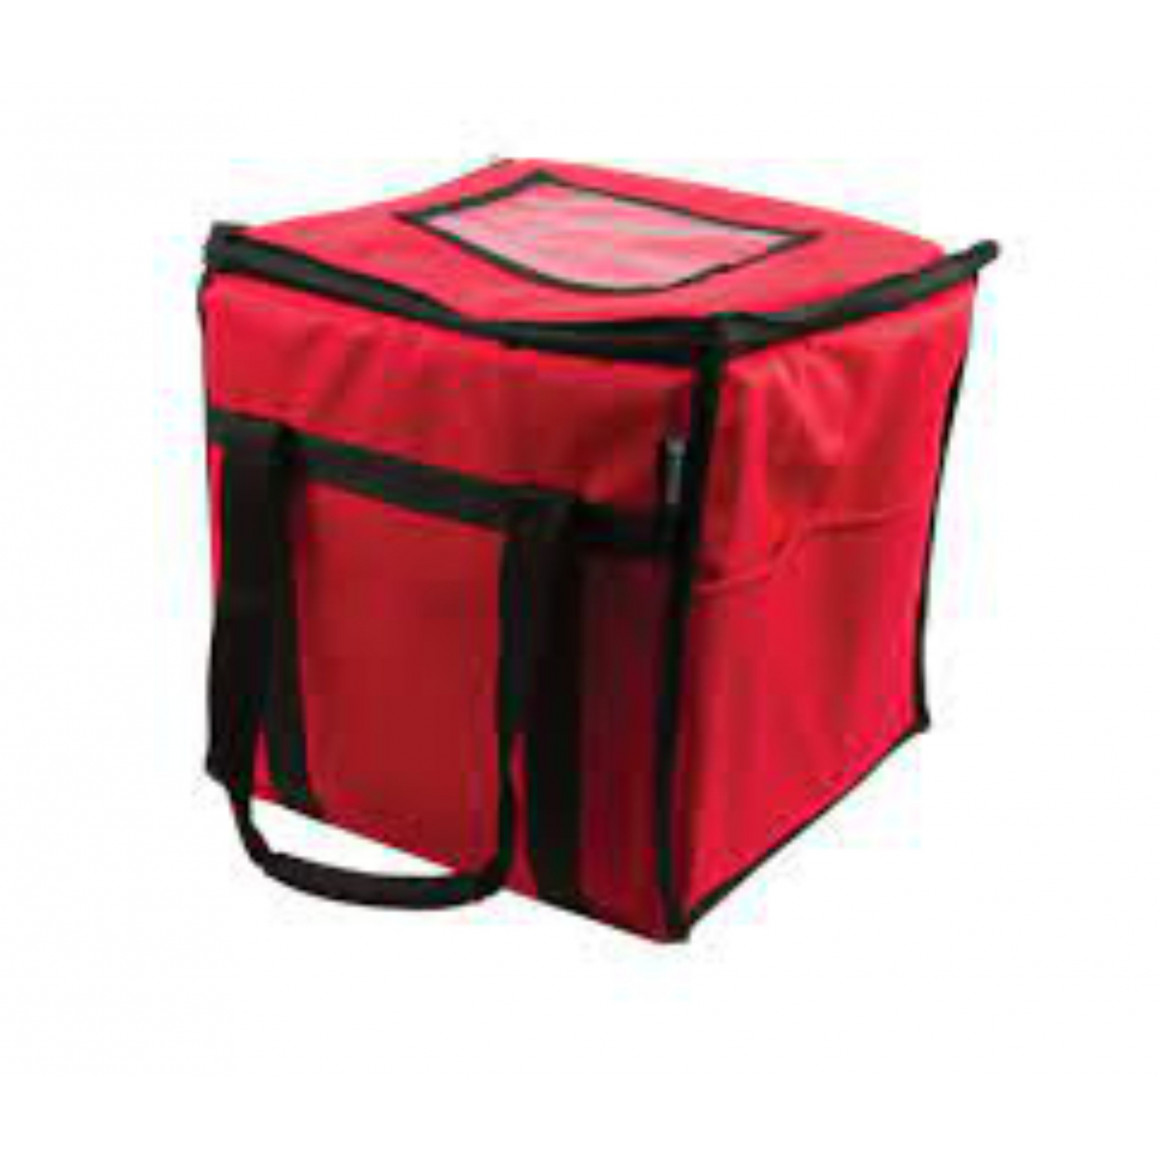 Insulated Food Carrier - Medium Size - Red